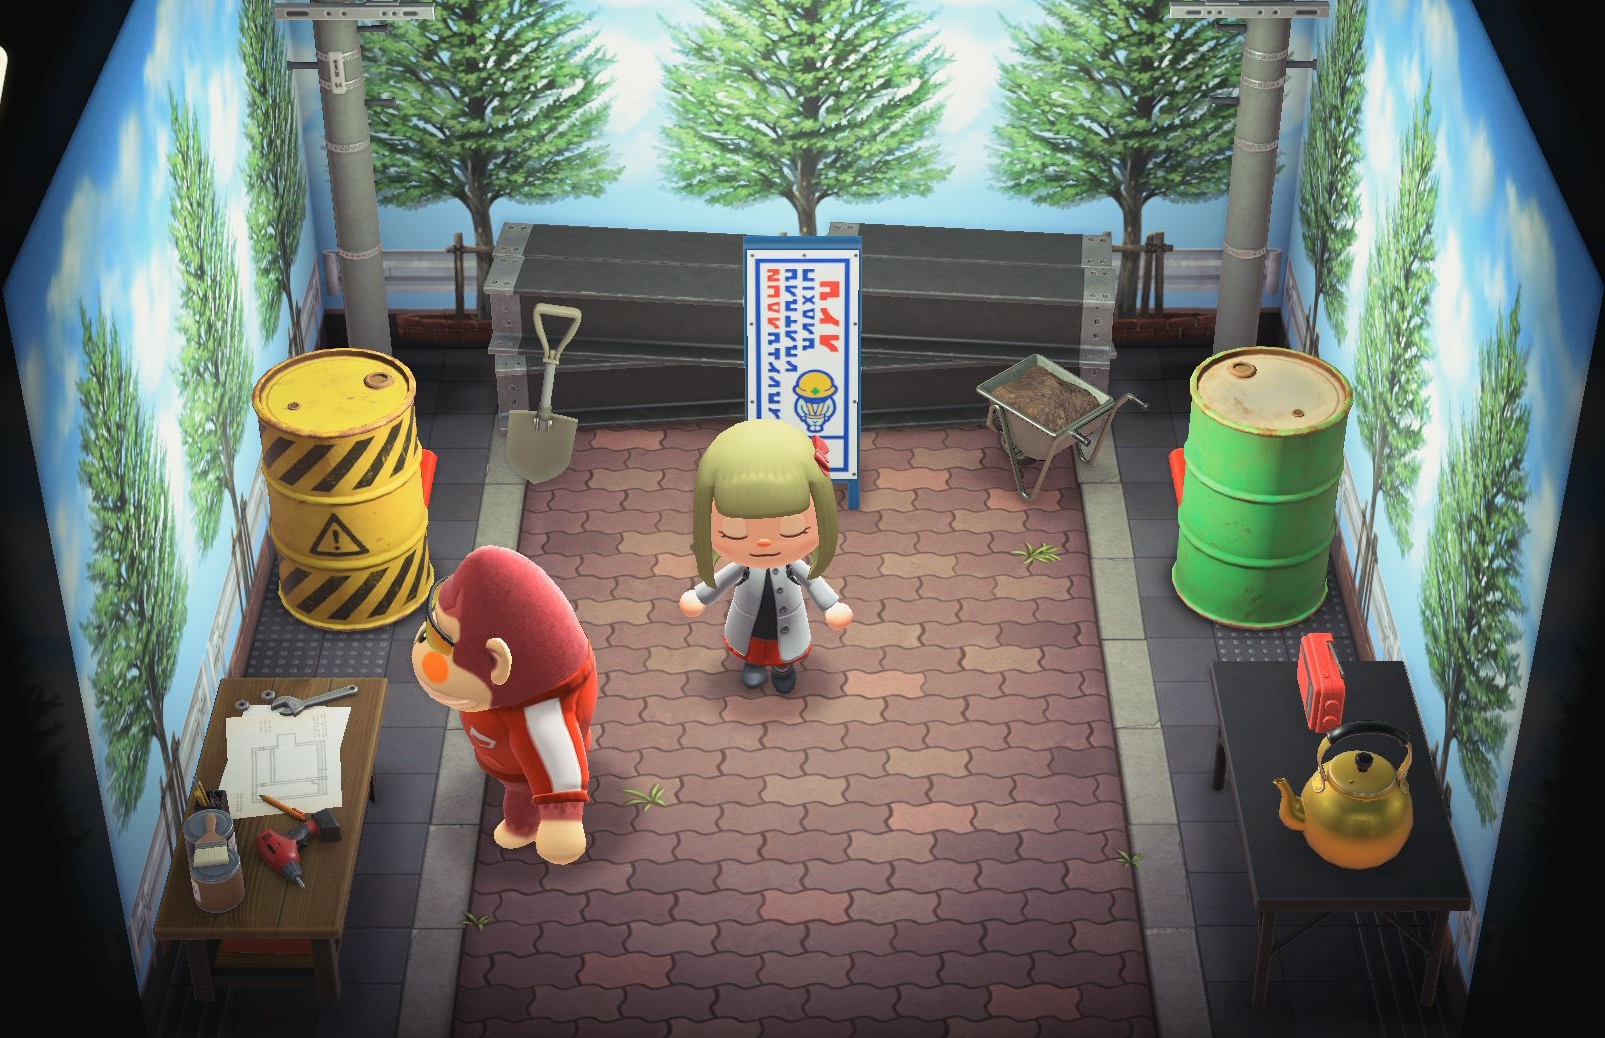 Interior of Boyd's house in Animal Crossing: New Horizons